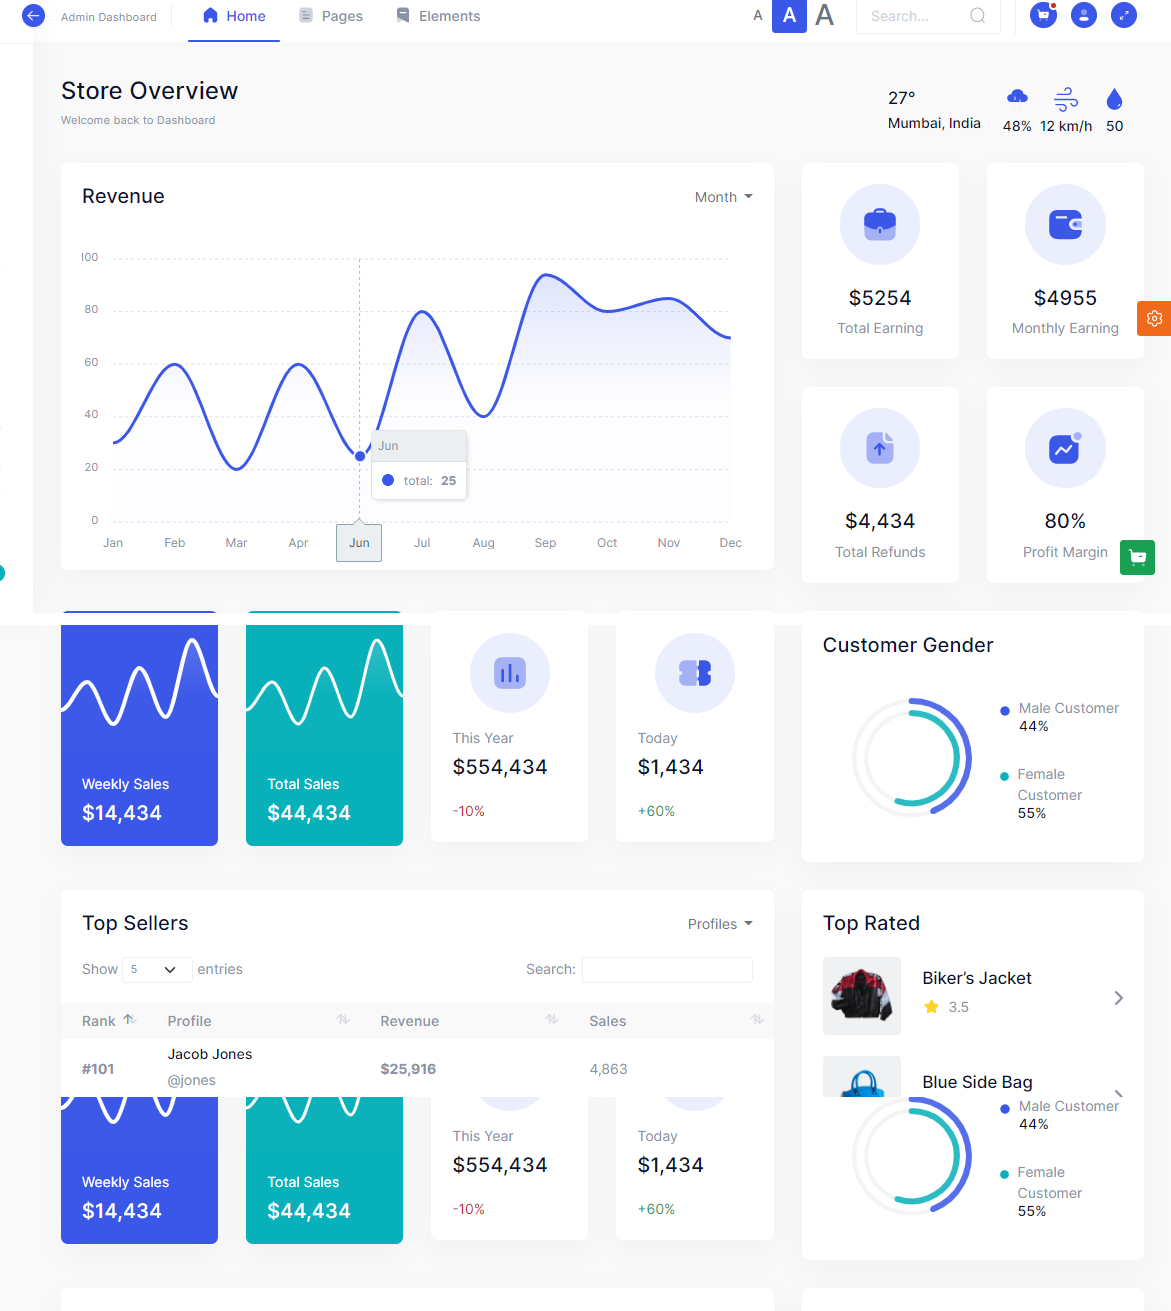 Bootstrap Admin Dashboard Template and UI Components Library | Hope UI Pro | Iqonic Design 360 image view in ecommerce and how you can boost sales conversion 360 Image View In Ecommerce And How You Can Boost Sales Conversion Admin Daashboard 1